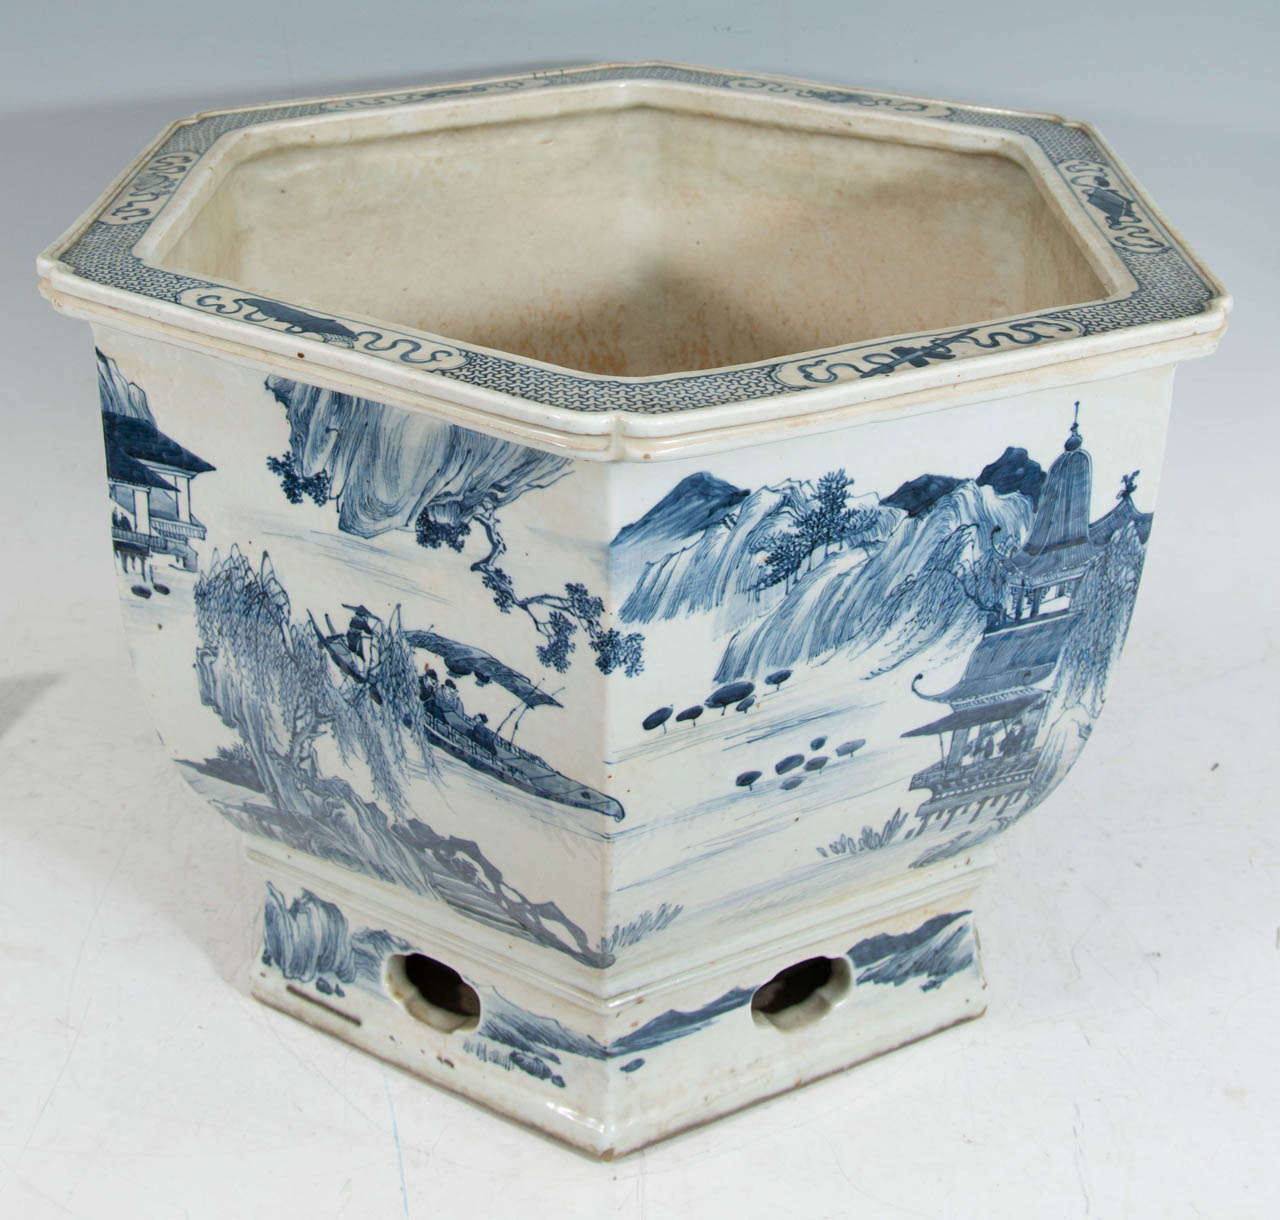 A late 18th or early 19th century six-sided Chinese porcelain planter painted in underglaze blue with pavilions and scenes of antique life.  The pierce-work base is integral with planter.

Good condition with age appropriate wear.  Some